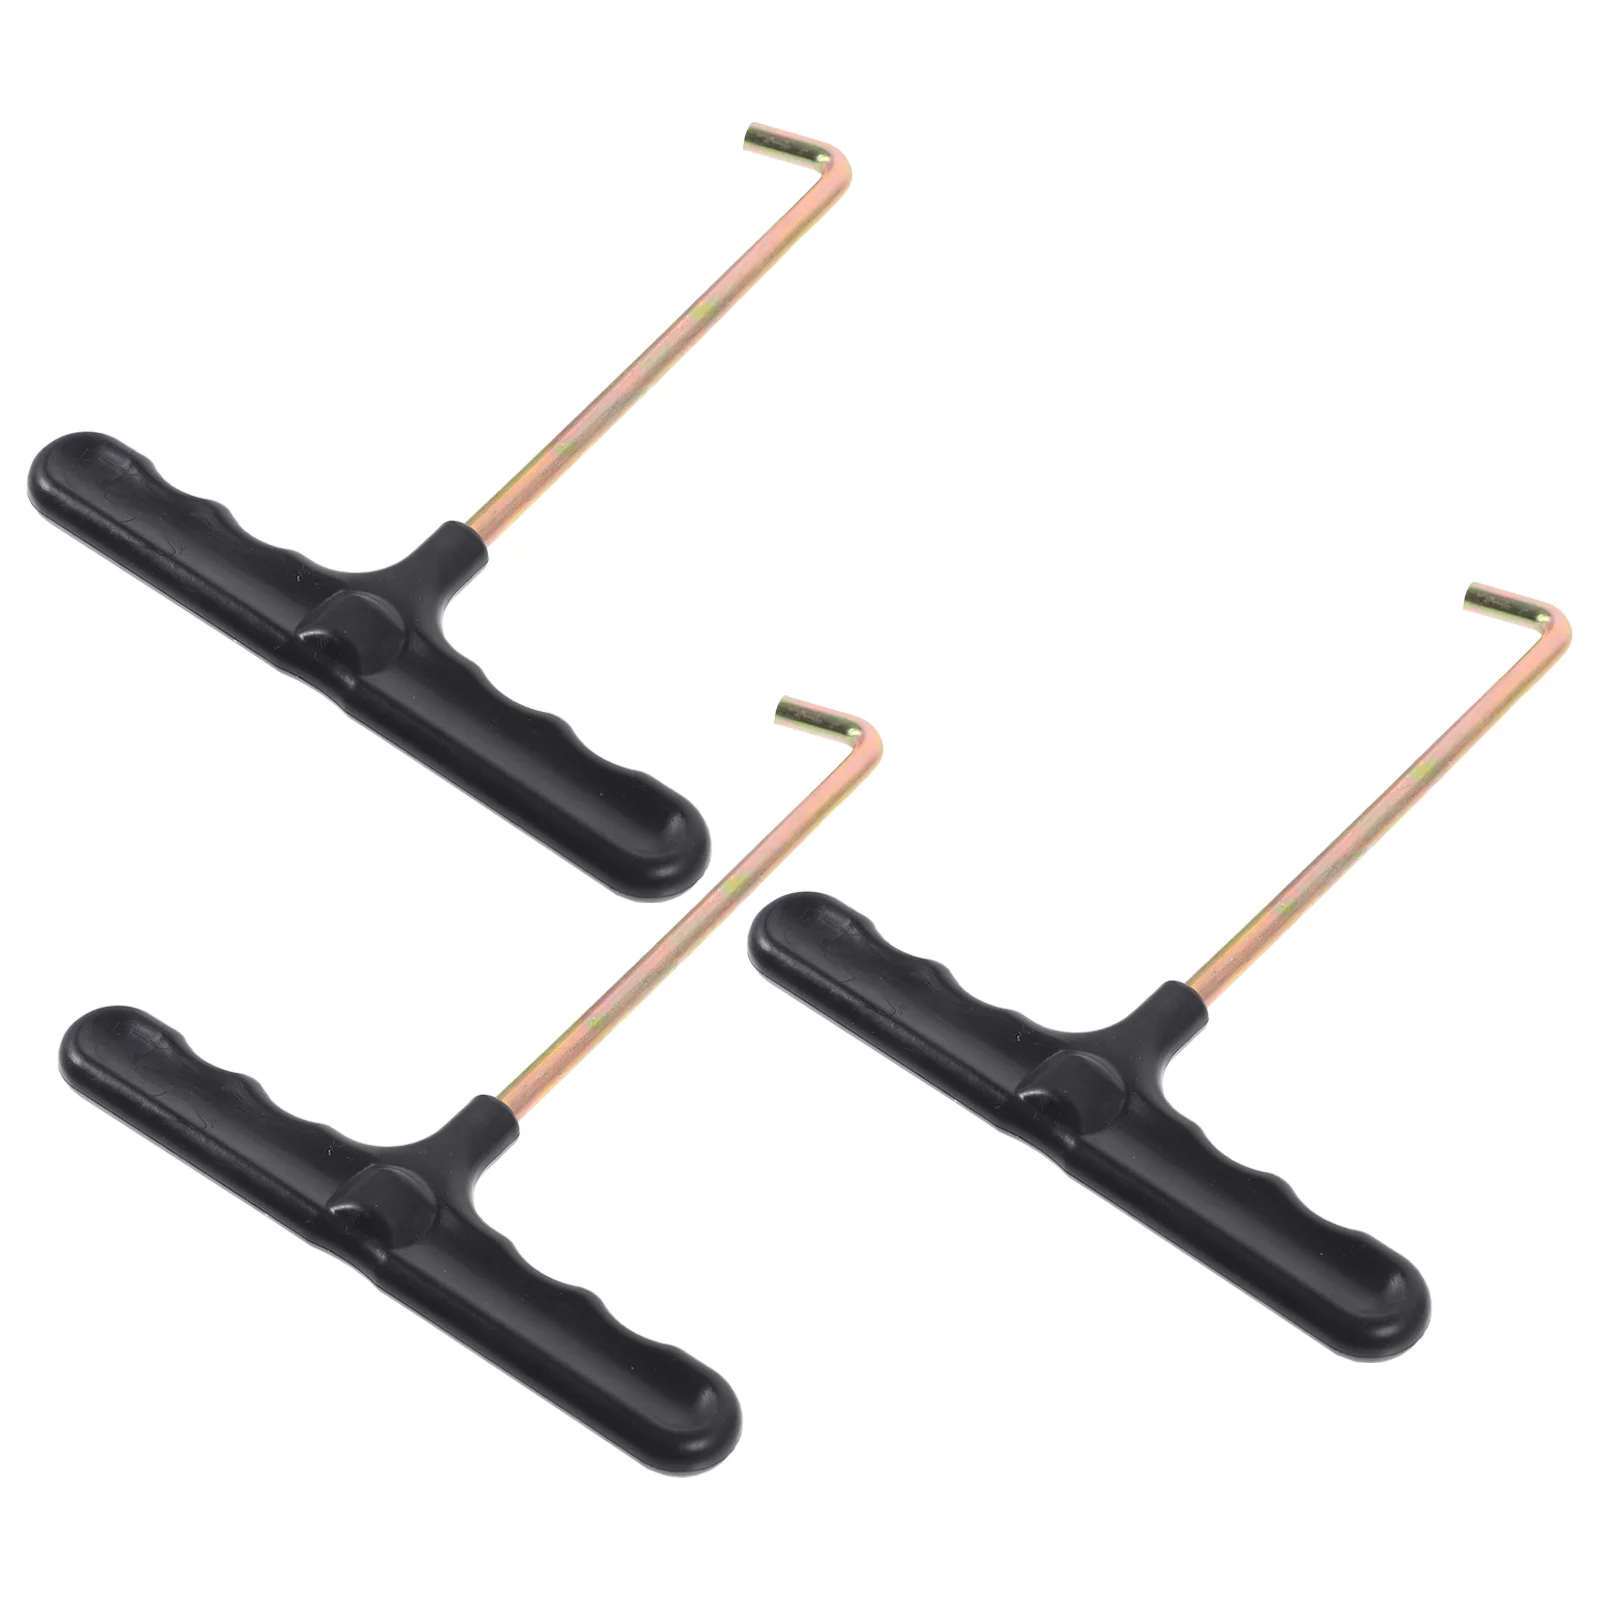 

3 Pcs Skate Shoe Hook Laces Pullers Tighteners Portable Shoelace Ice Skates Tightening Tool Iron T-shaped Hooks Pulling